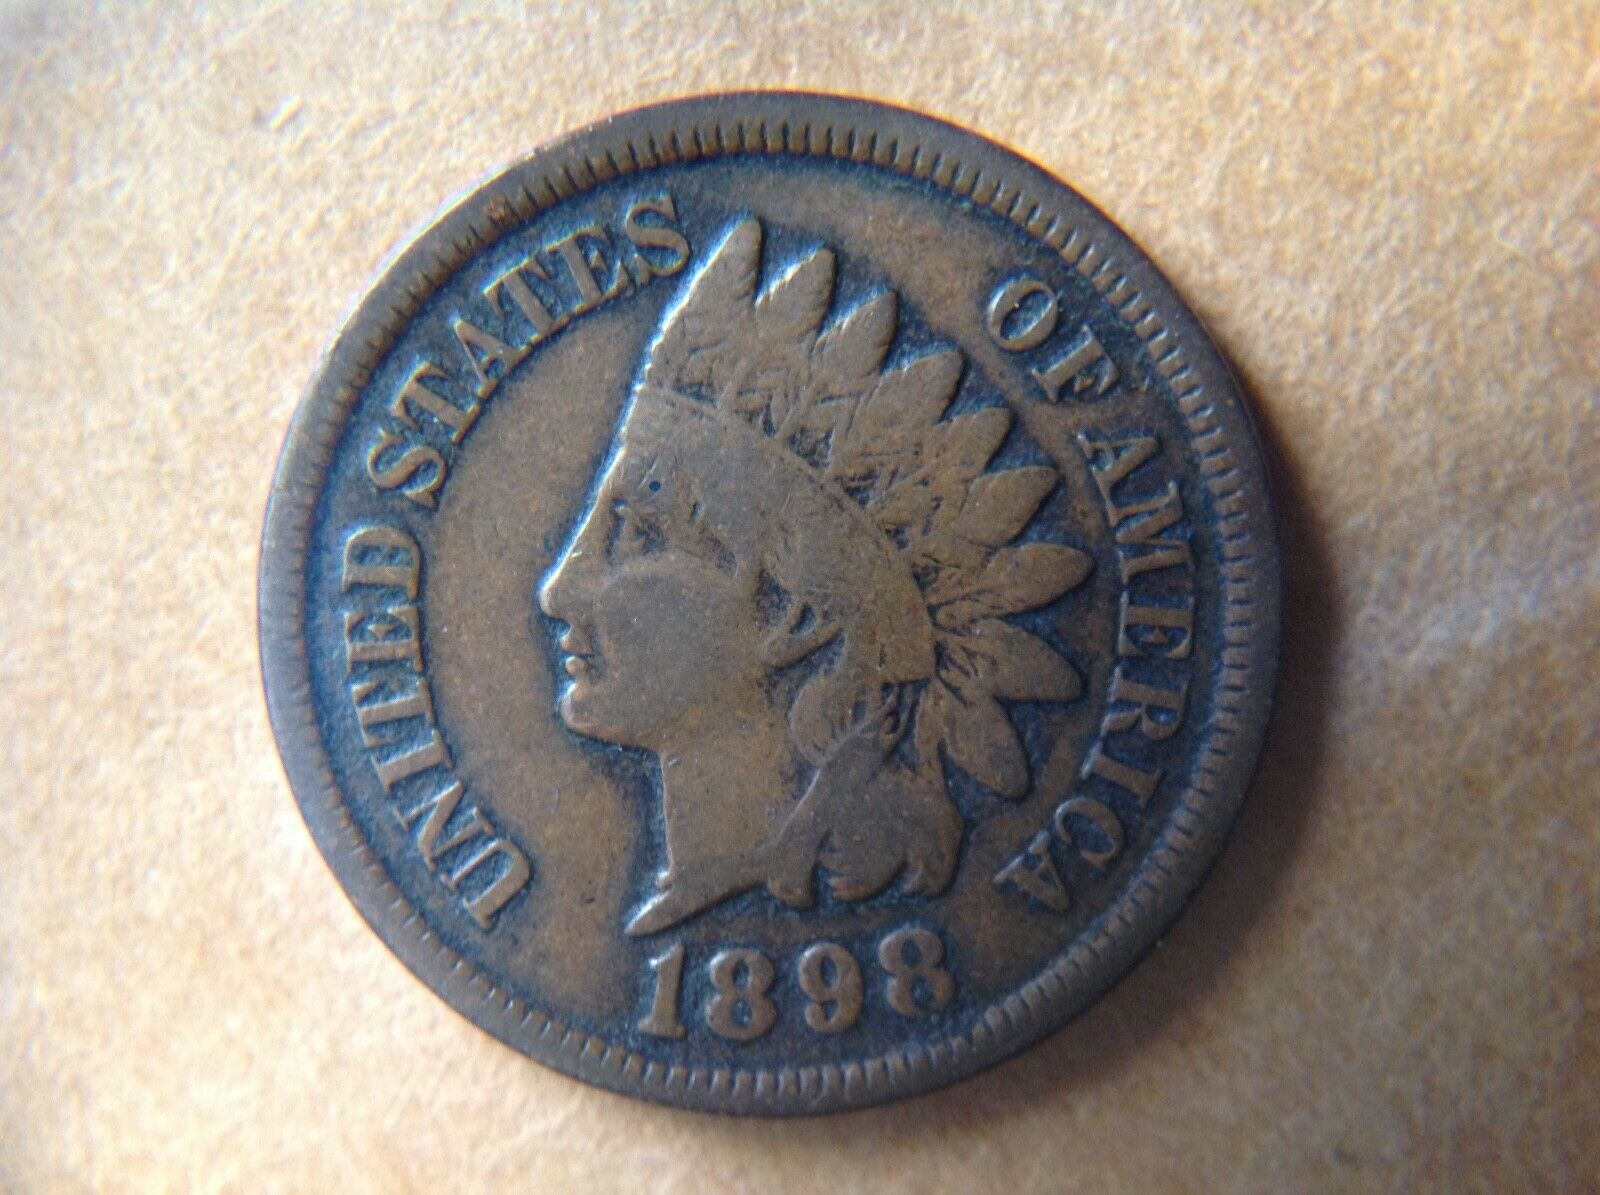 1888 Indian Head Penny One Cent Coin